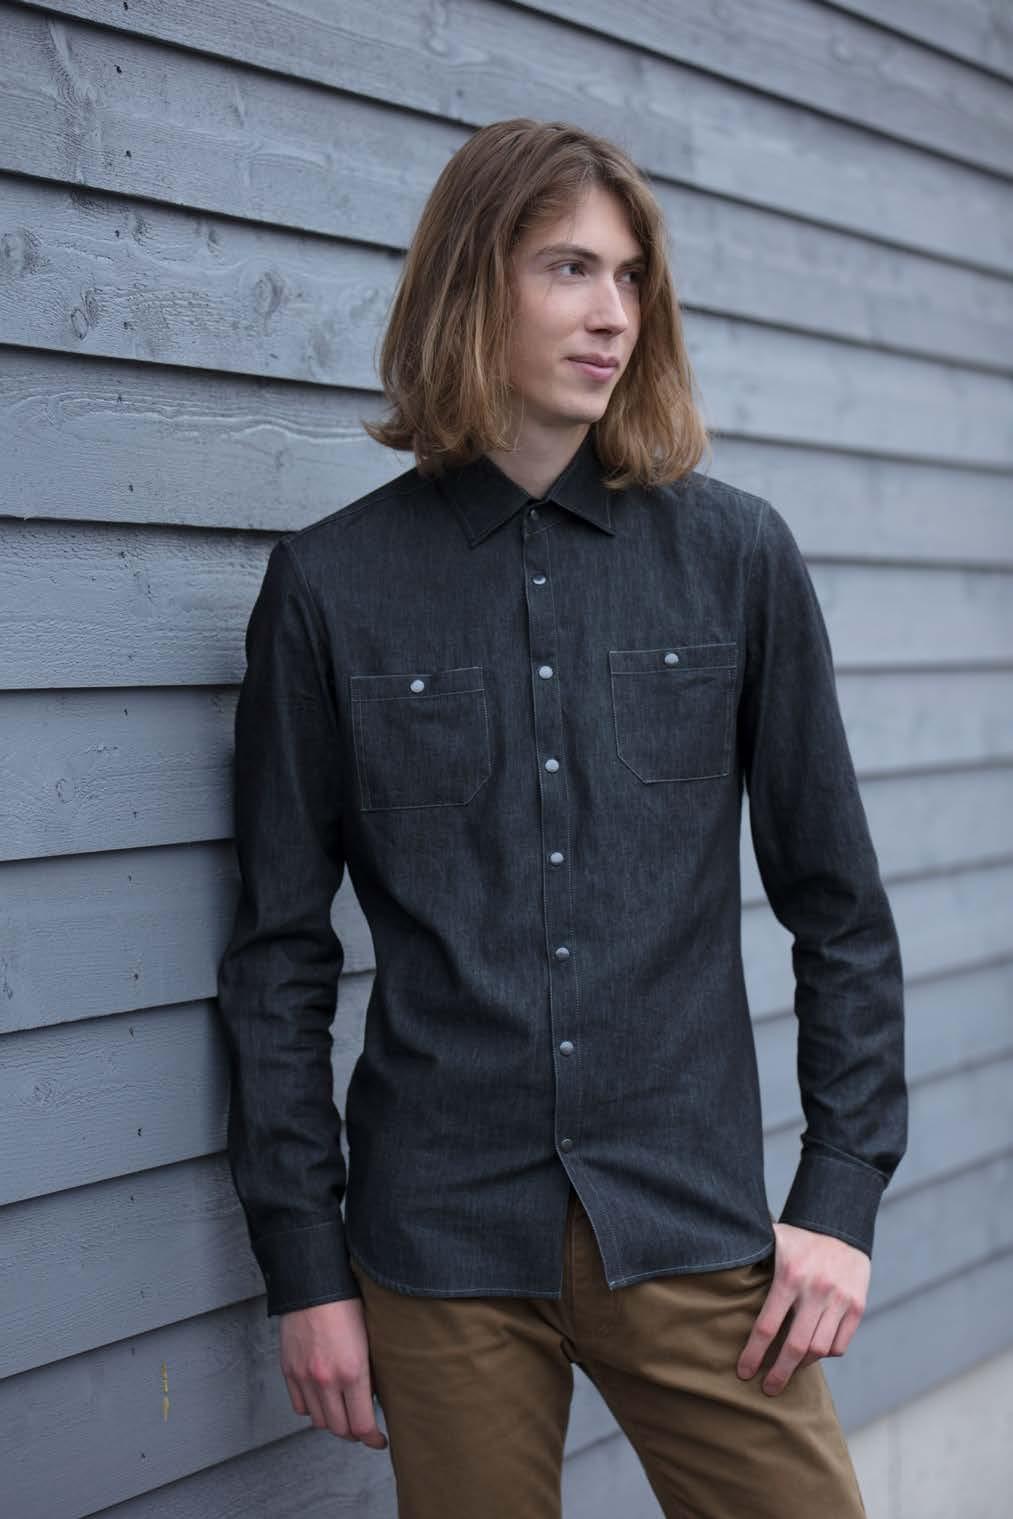 COLLAR FOR MEN S SHIRT OTTOBRE design 7/2017, design 6 The collar instructions have been drawn up for men s shirts sewn from cotton poplin, chambray, lightweight denim, flannel, or similar fabric.